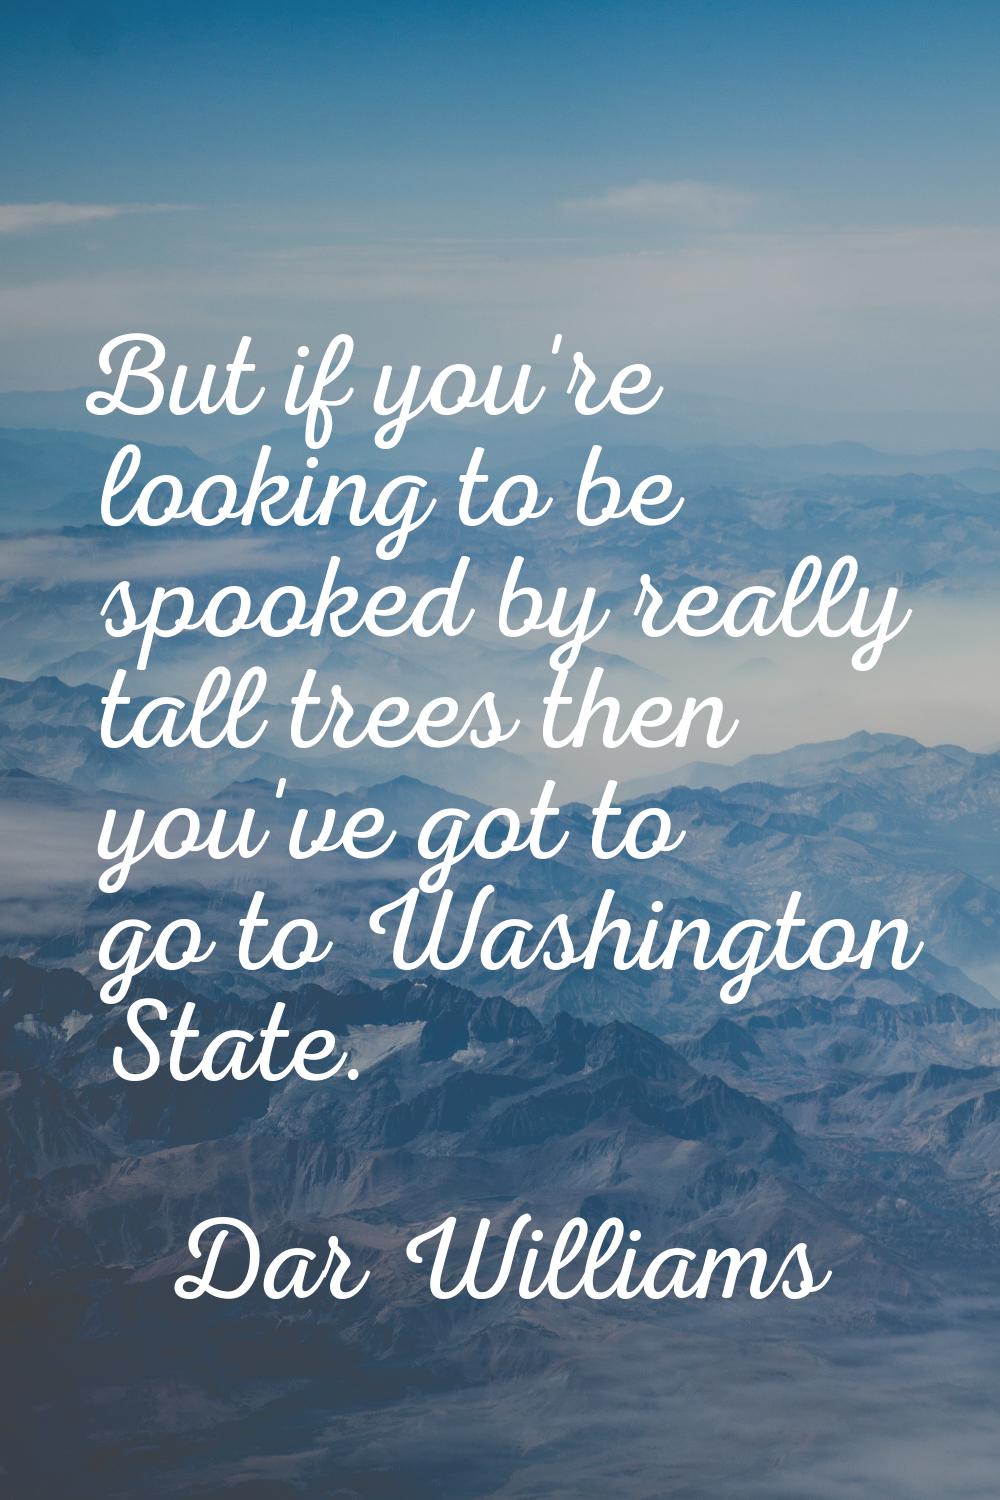 But if you're looking to be spooked by really tall trees then you've got to go to Washington State.